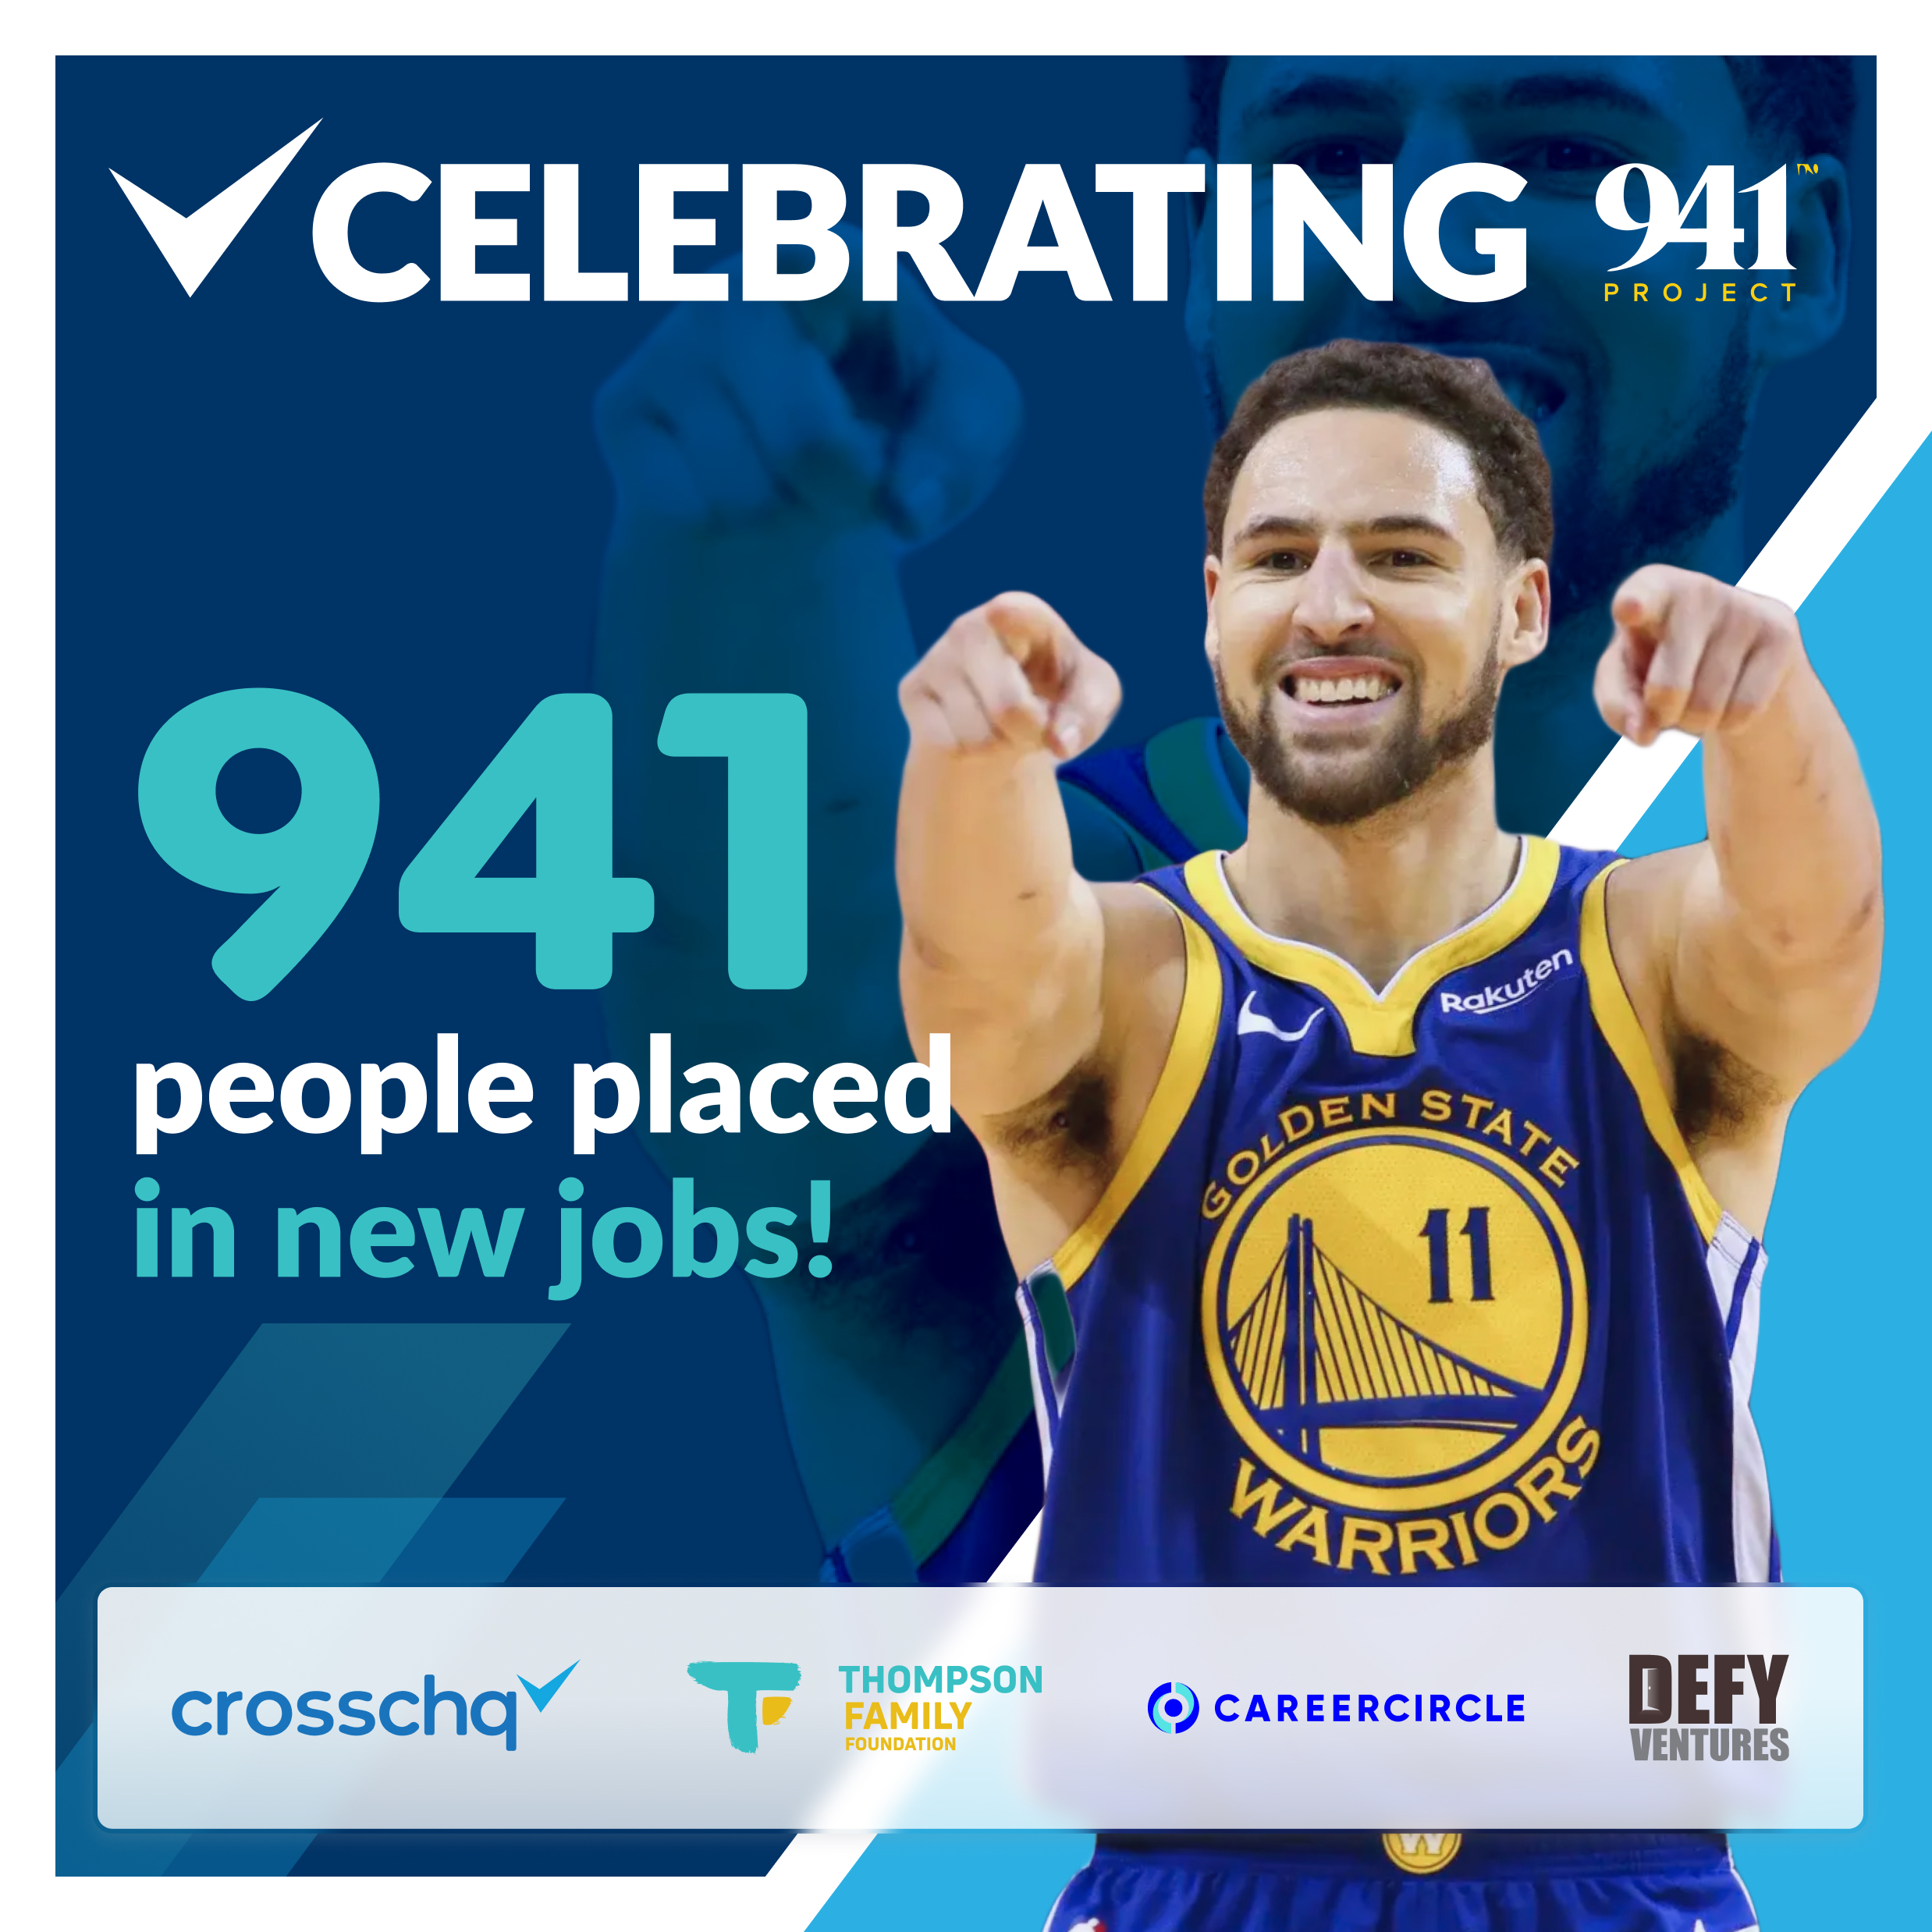 The Power of Changing Lives: Crosschq Marks Success of Klay Thompson’s The 941 Project